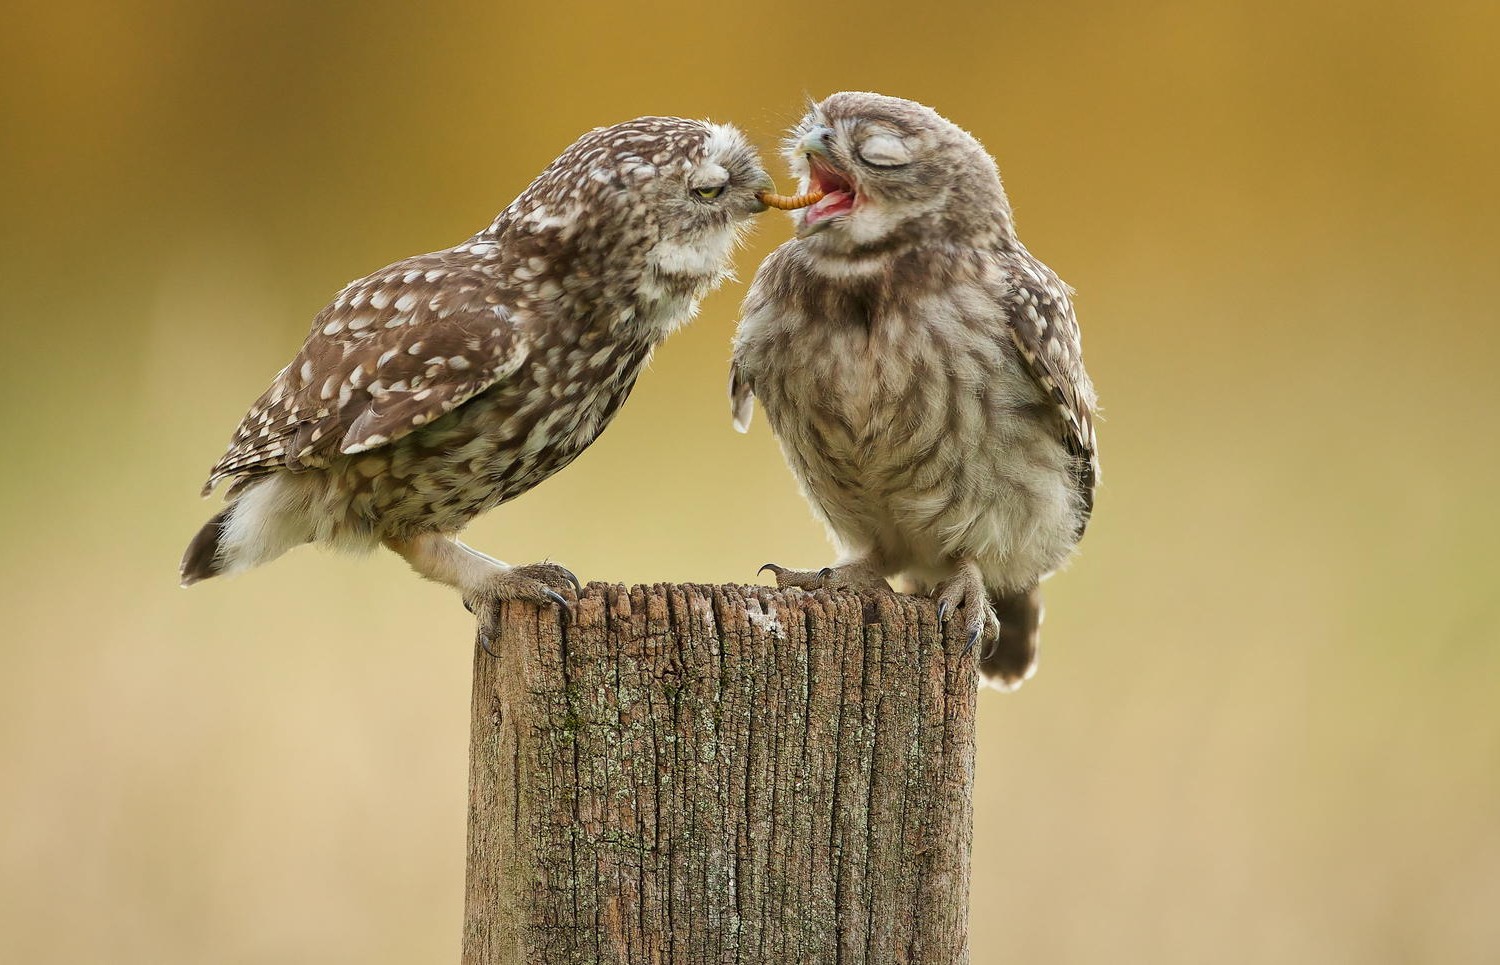 What's The Story Behind This Cute Photo Of Little Owls Sharing Grub?